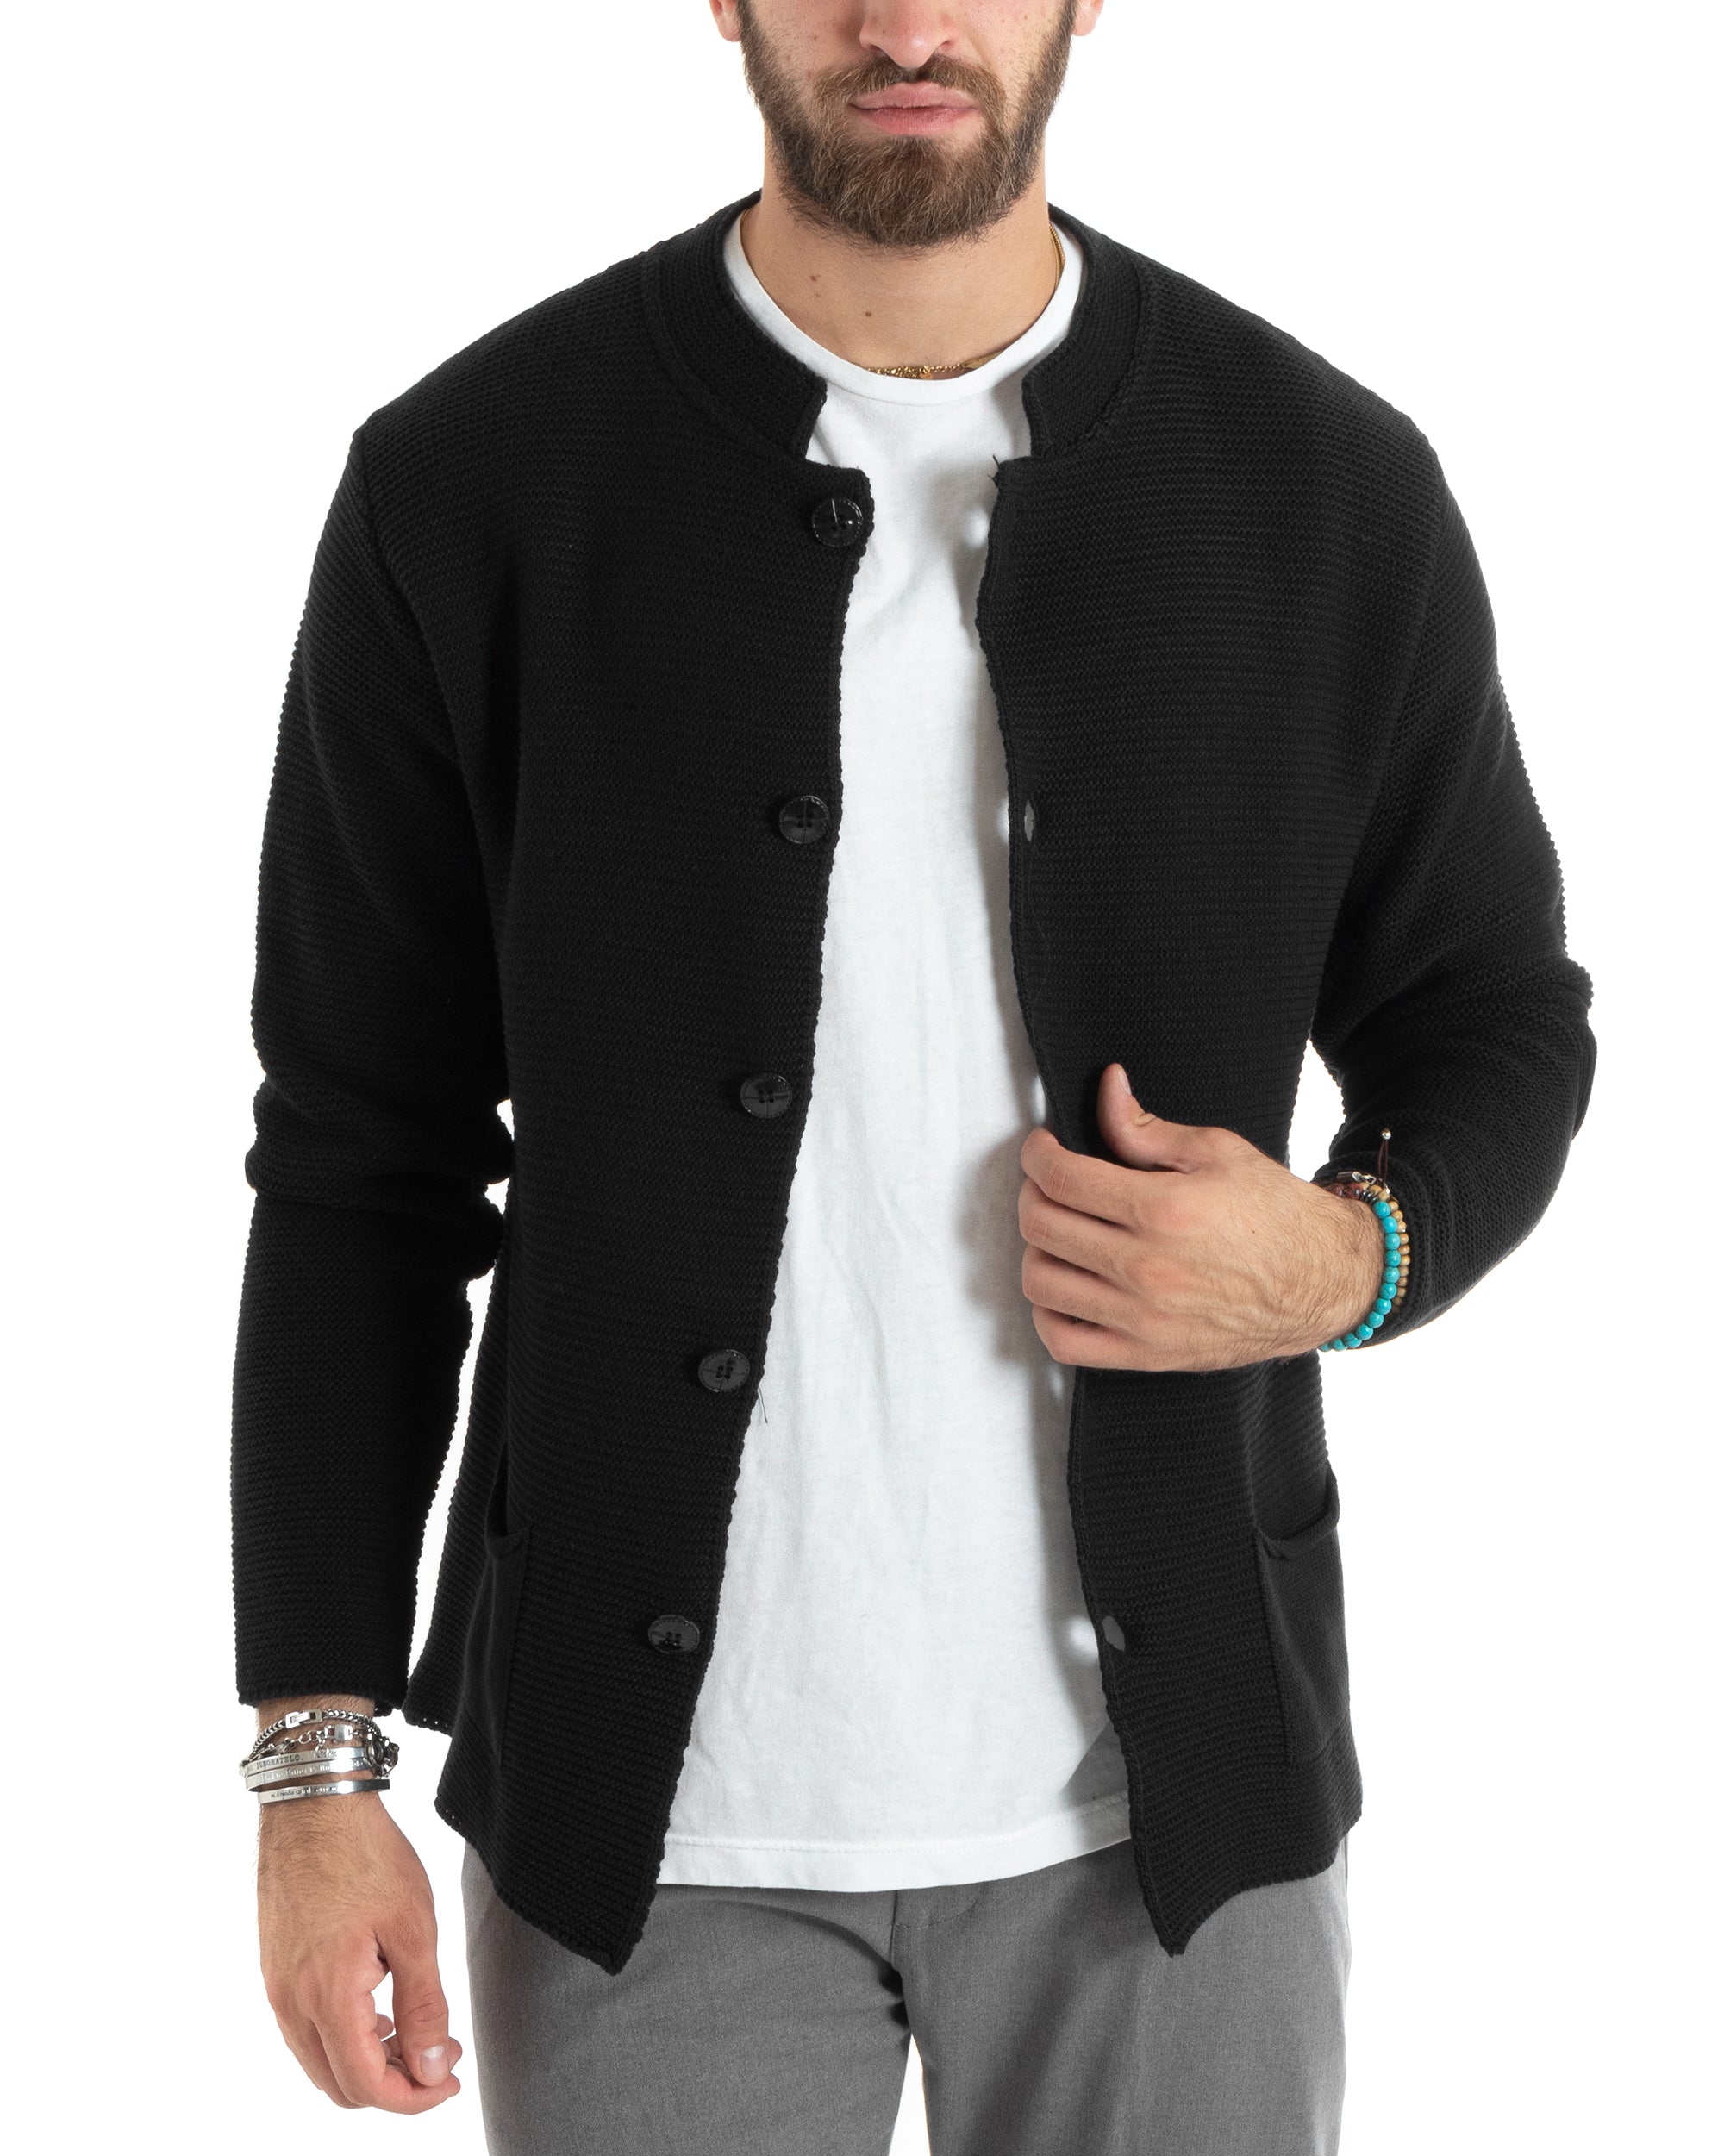 Men's Cardigan Korean Collar Single-breasted Sweater Knitted Jacket With Buttons Casual Black GIOSAL-M2669A